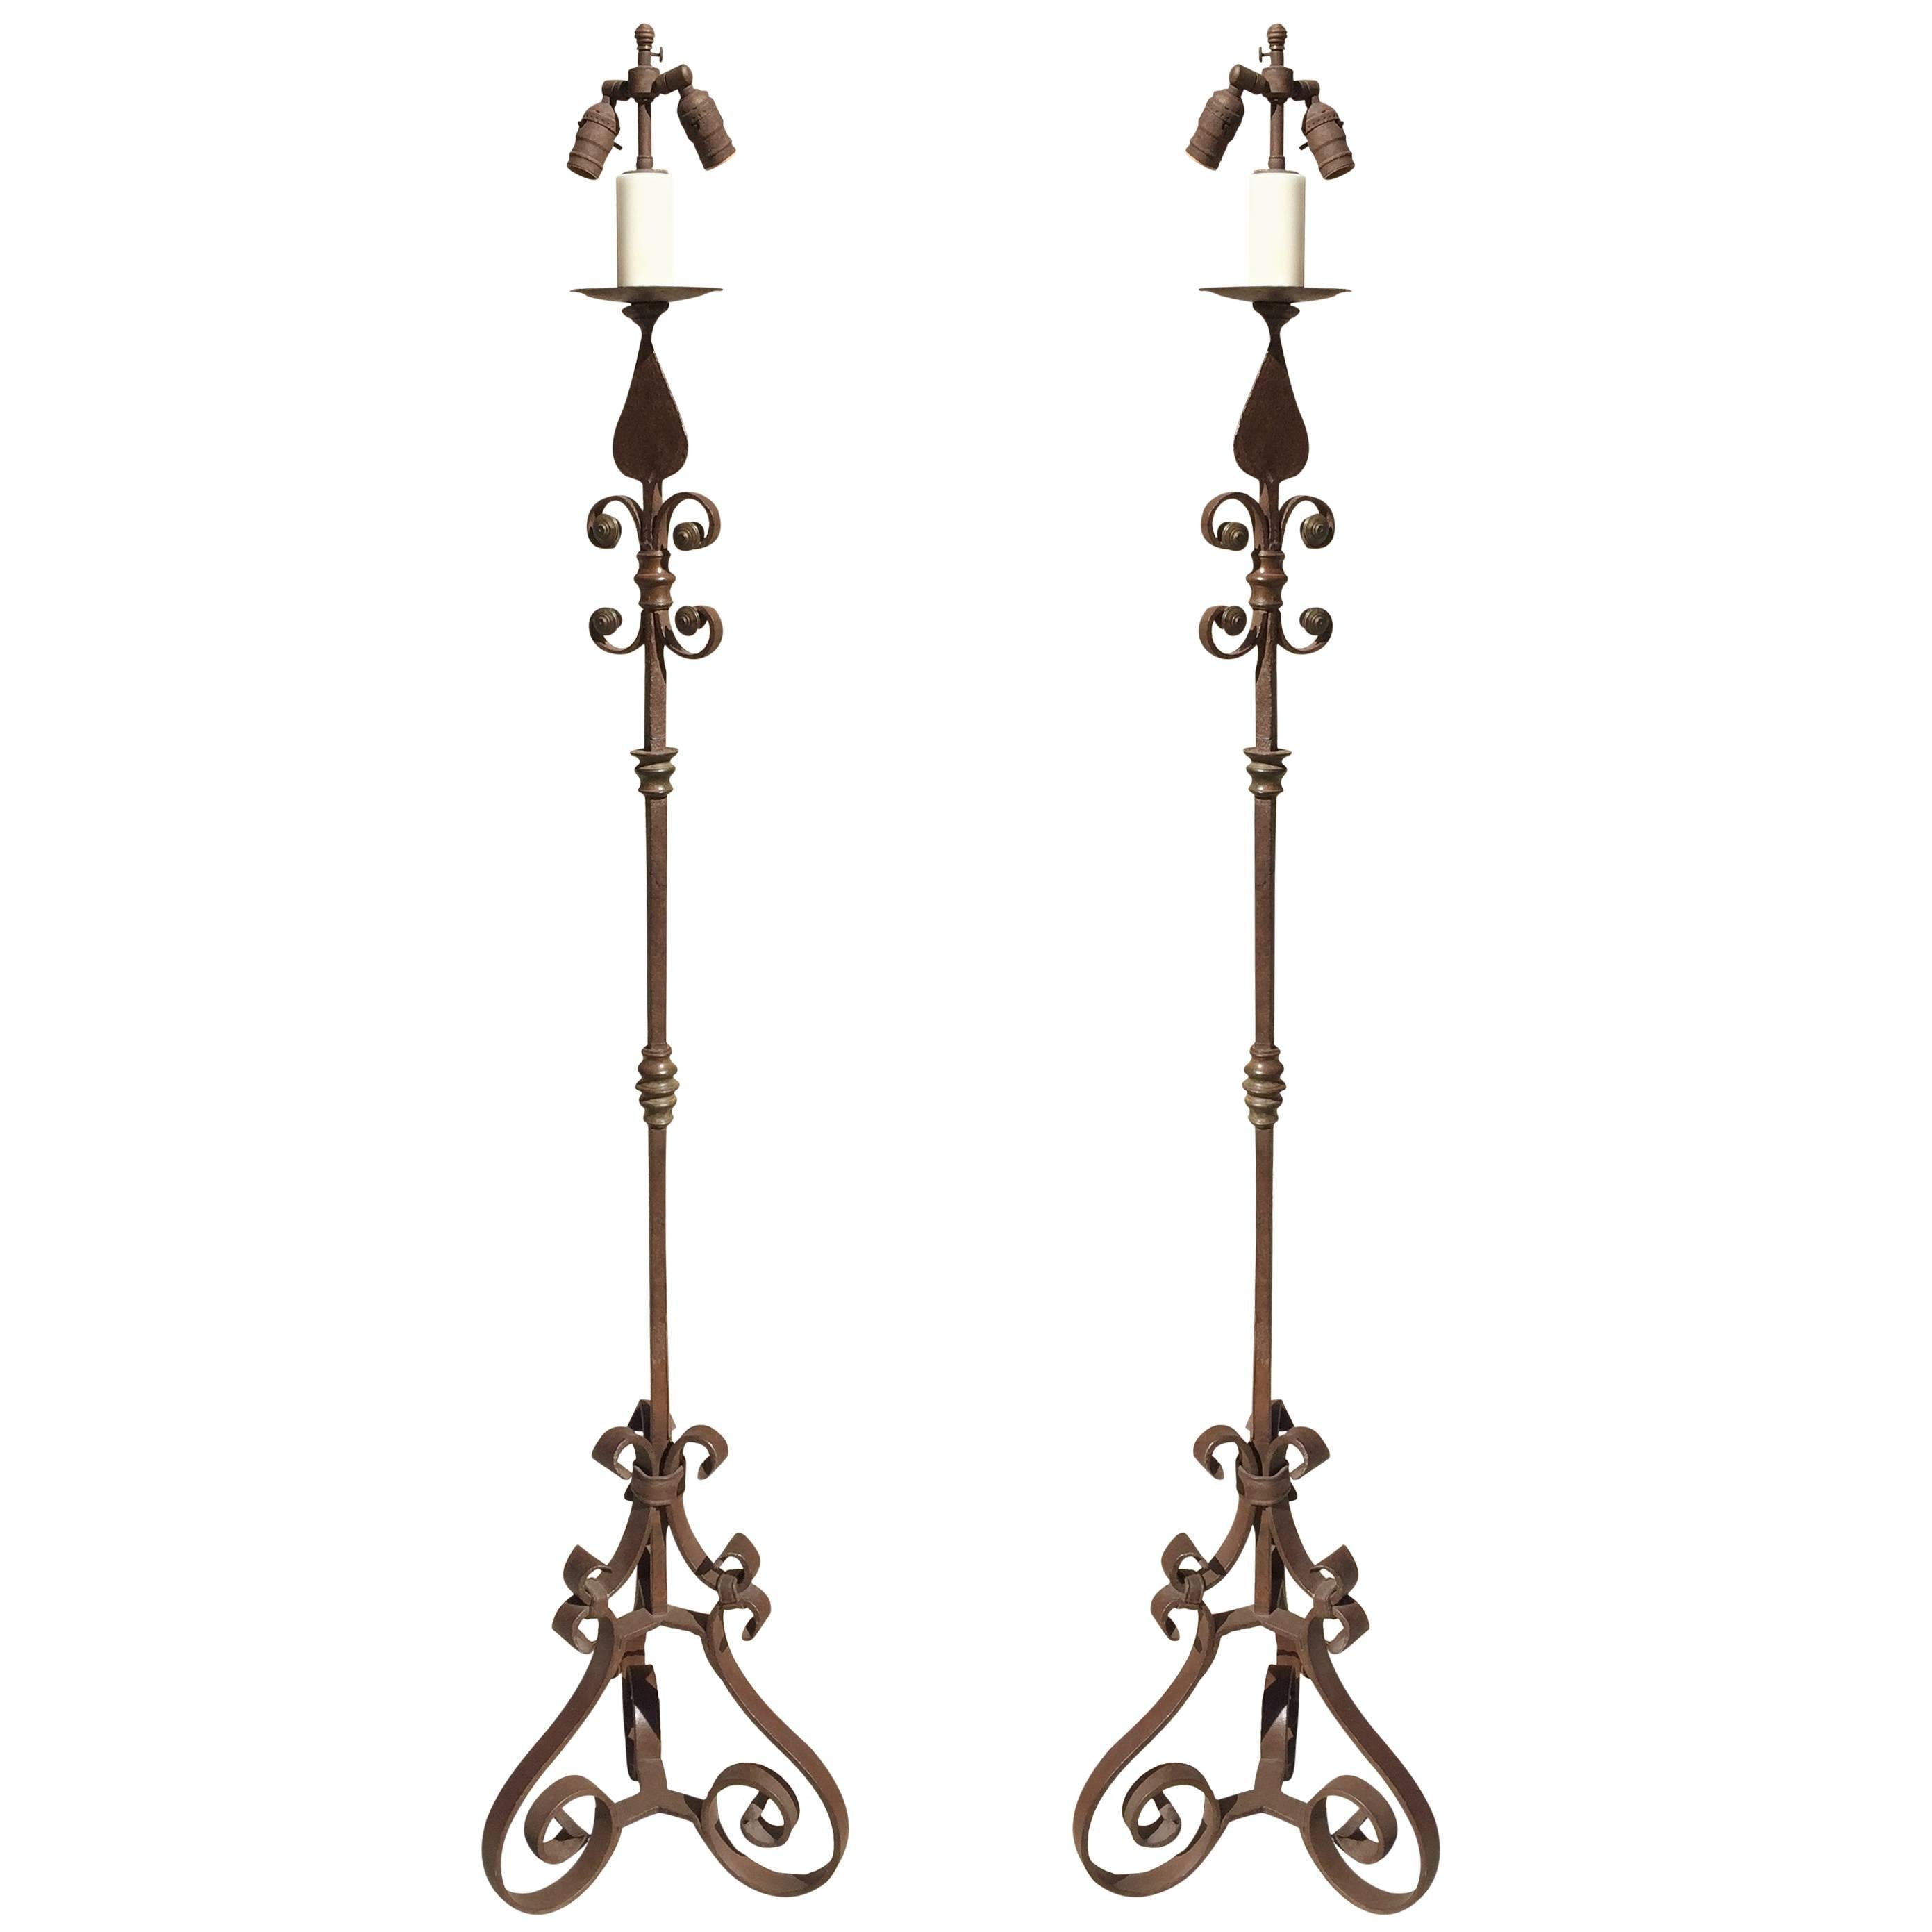 Pair of American Arts and Crafts Wrought Iron Floor Lamps